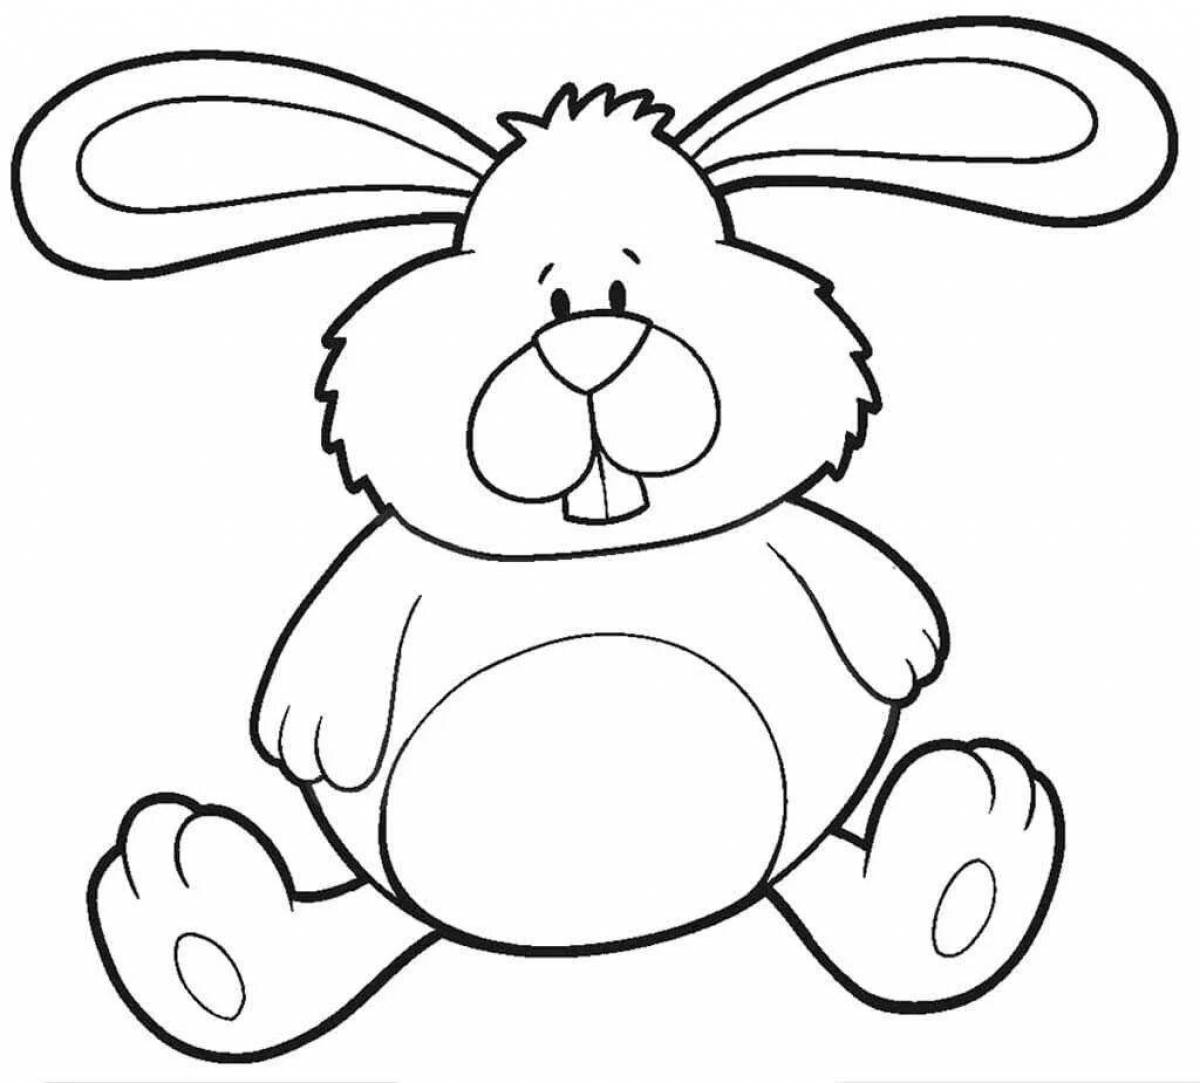 Snuggly coloring page bunny for kids 3 4